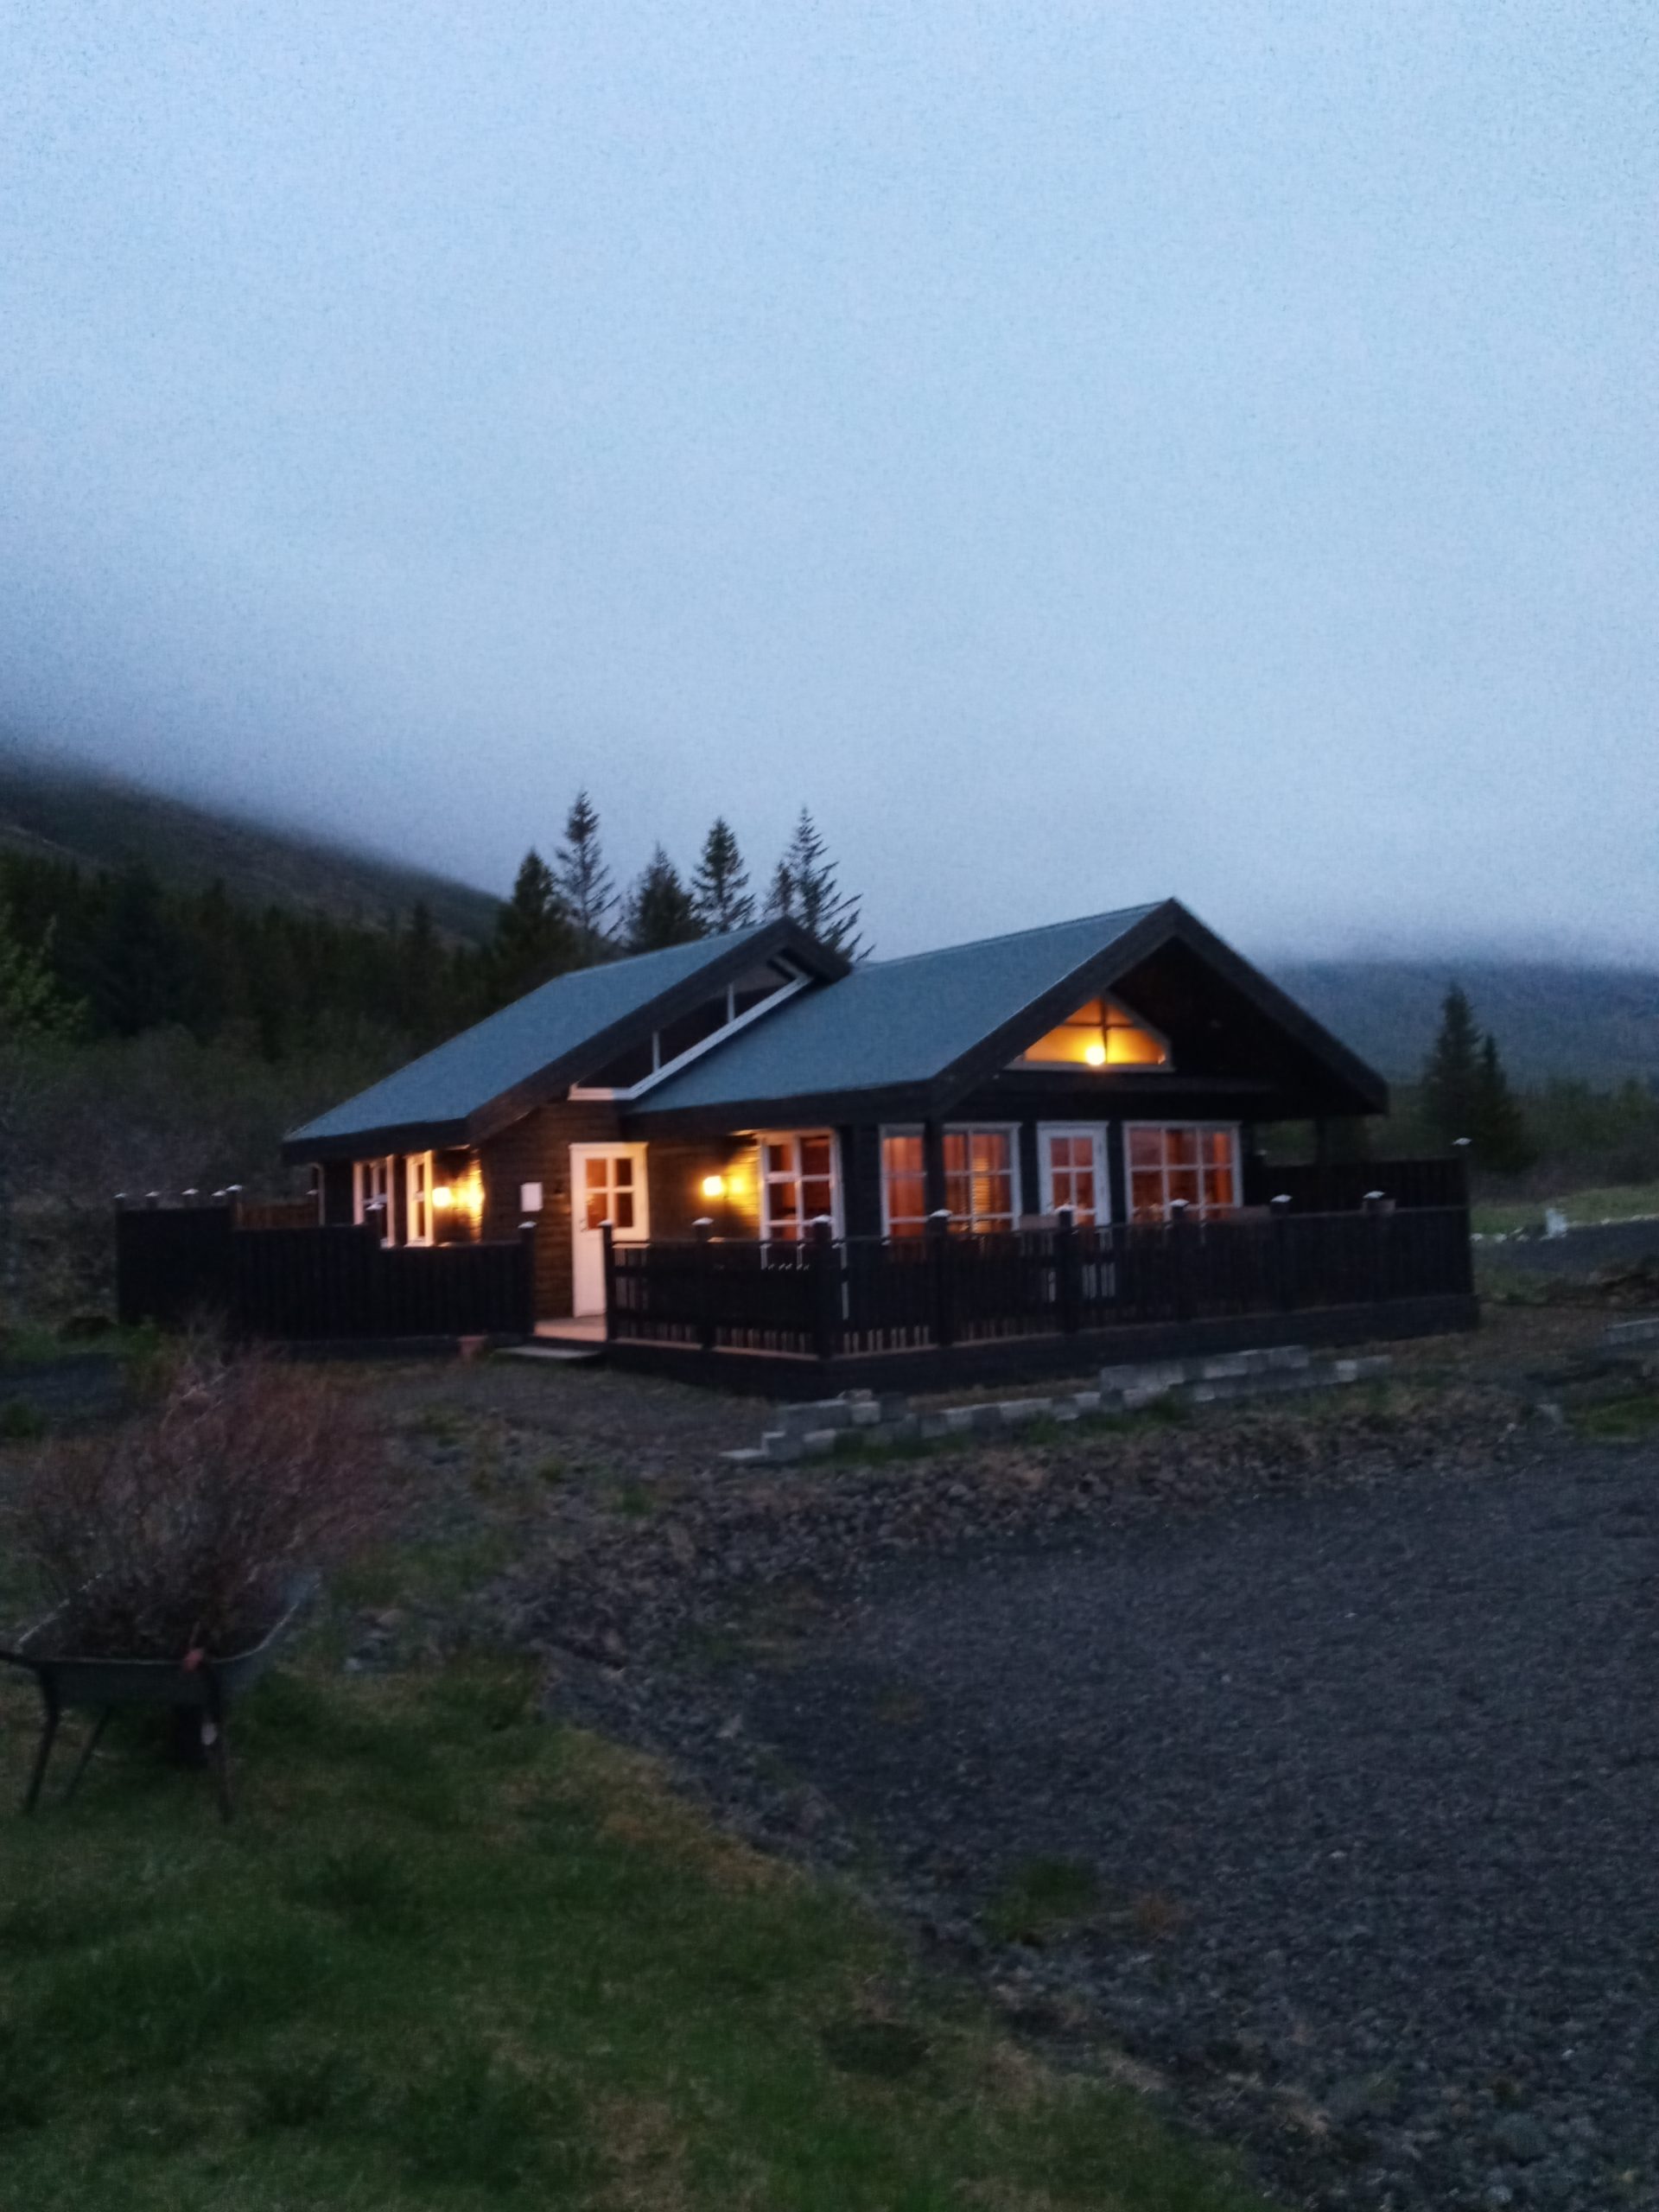 Cabin at night at Gullkistan, Iceland